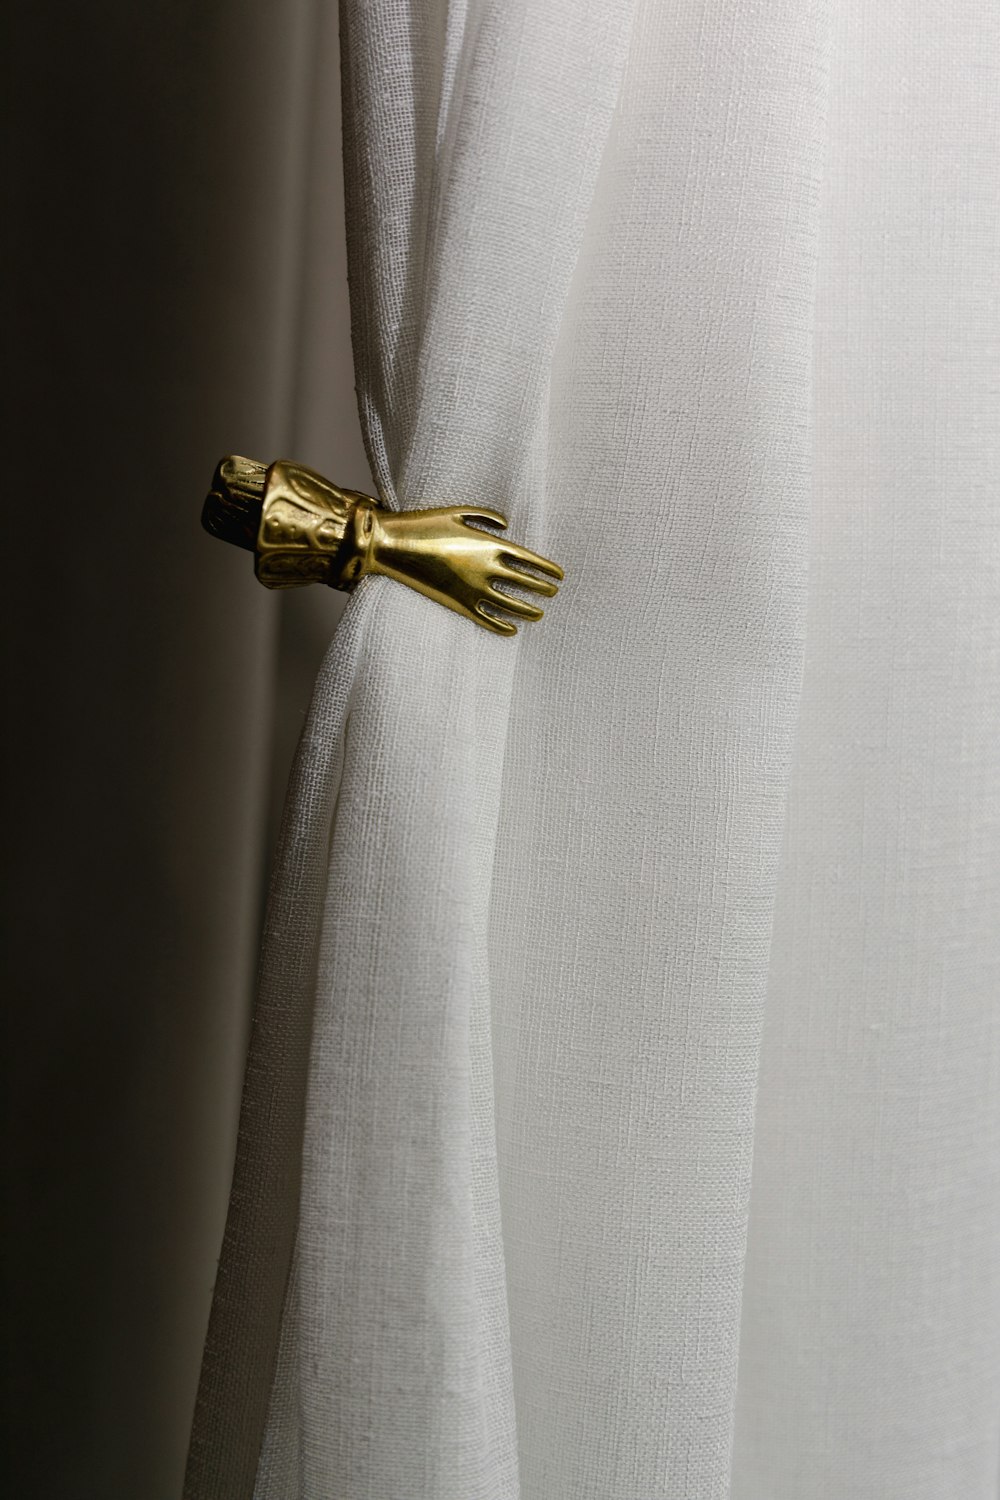 a close up of a curtain with a gold handle on it